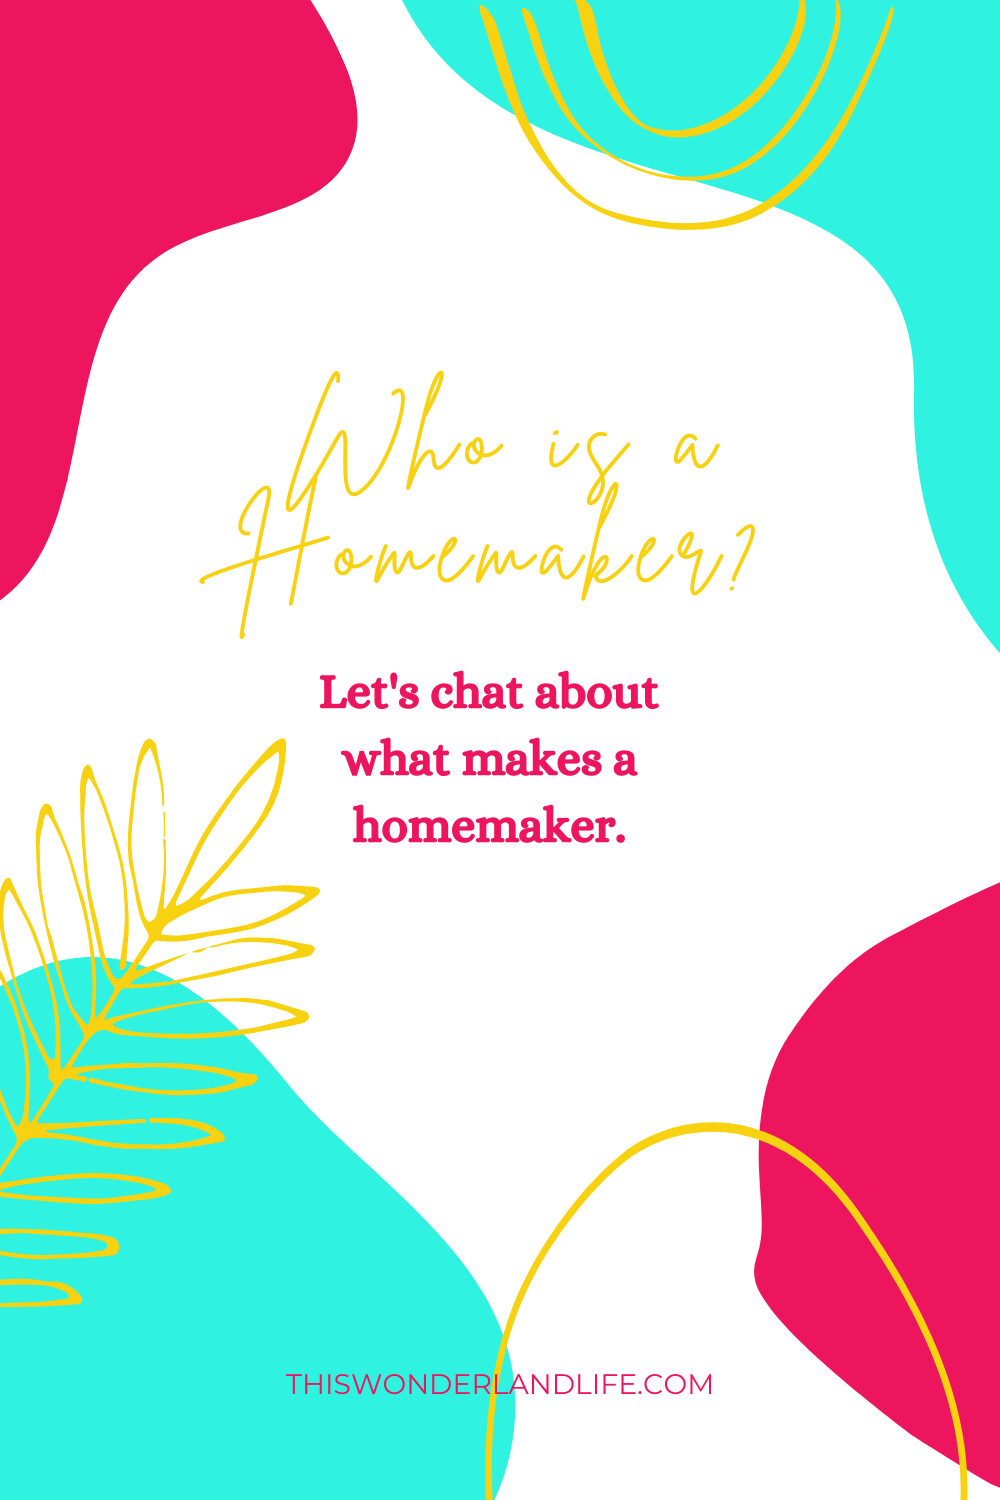 Who is a homemaker?